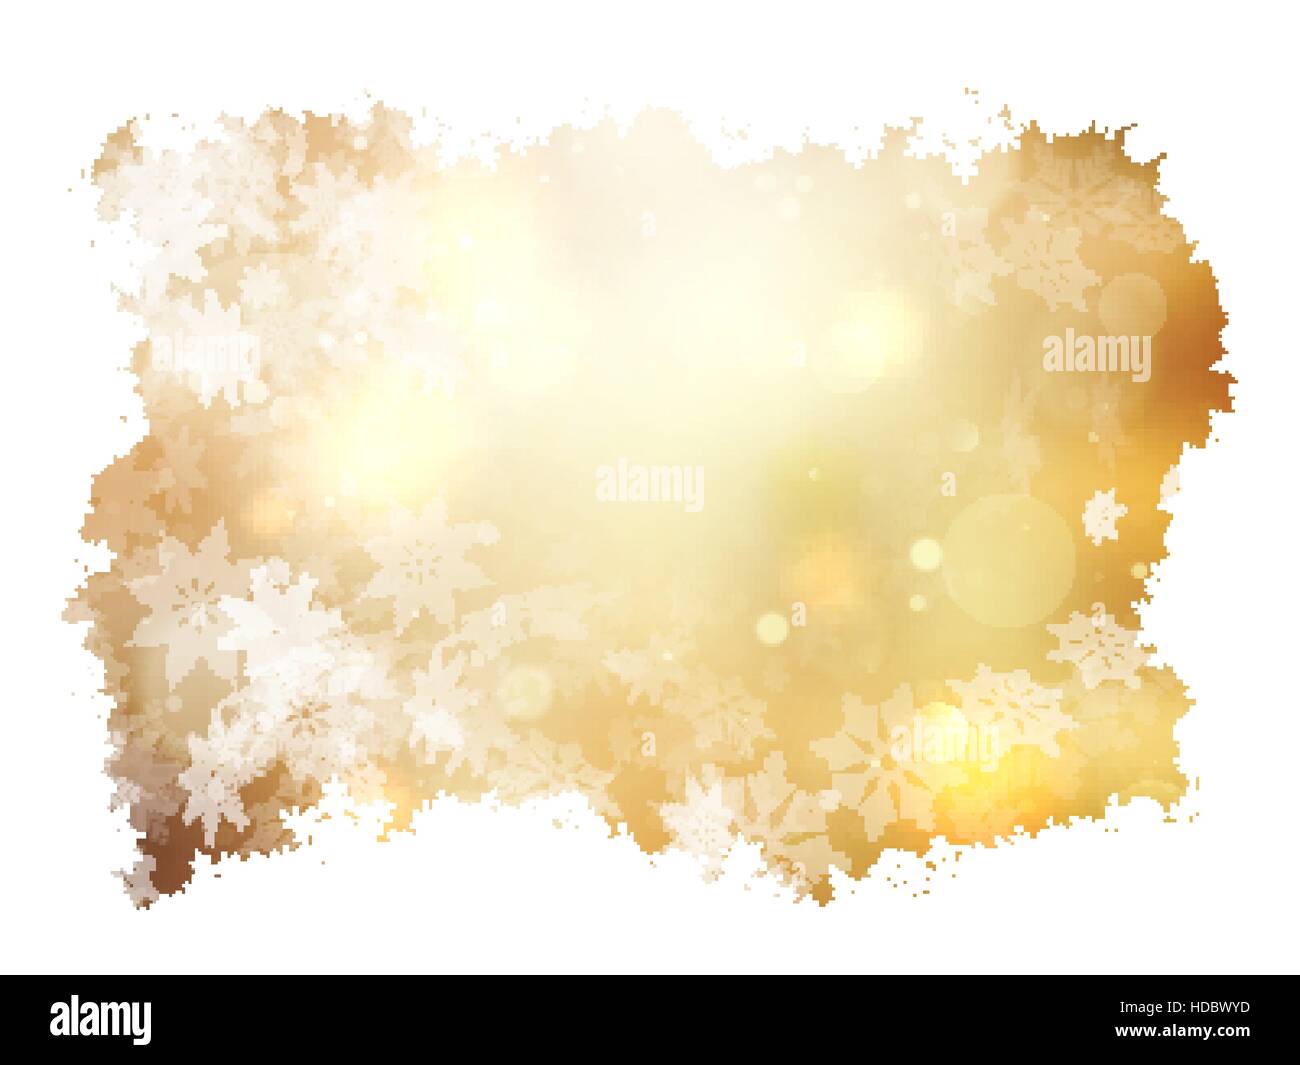 Gold Christmas background with snowflakes. Illustration for Christmas posters, icons, greeting cards, print and web projects. EPS 10 vector file inclu Stock Vector